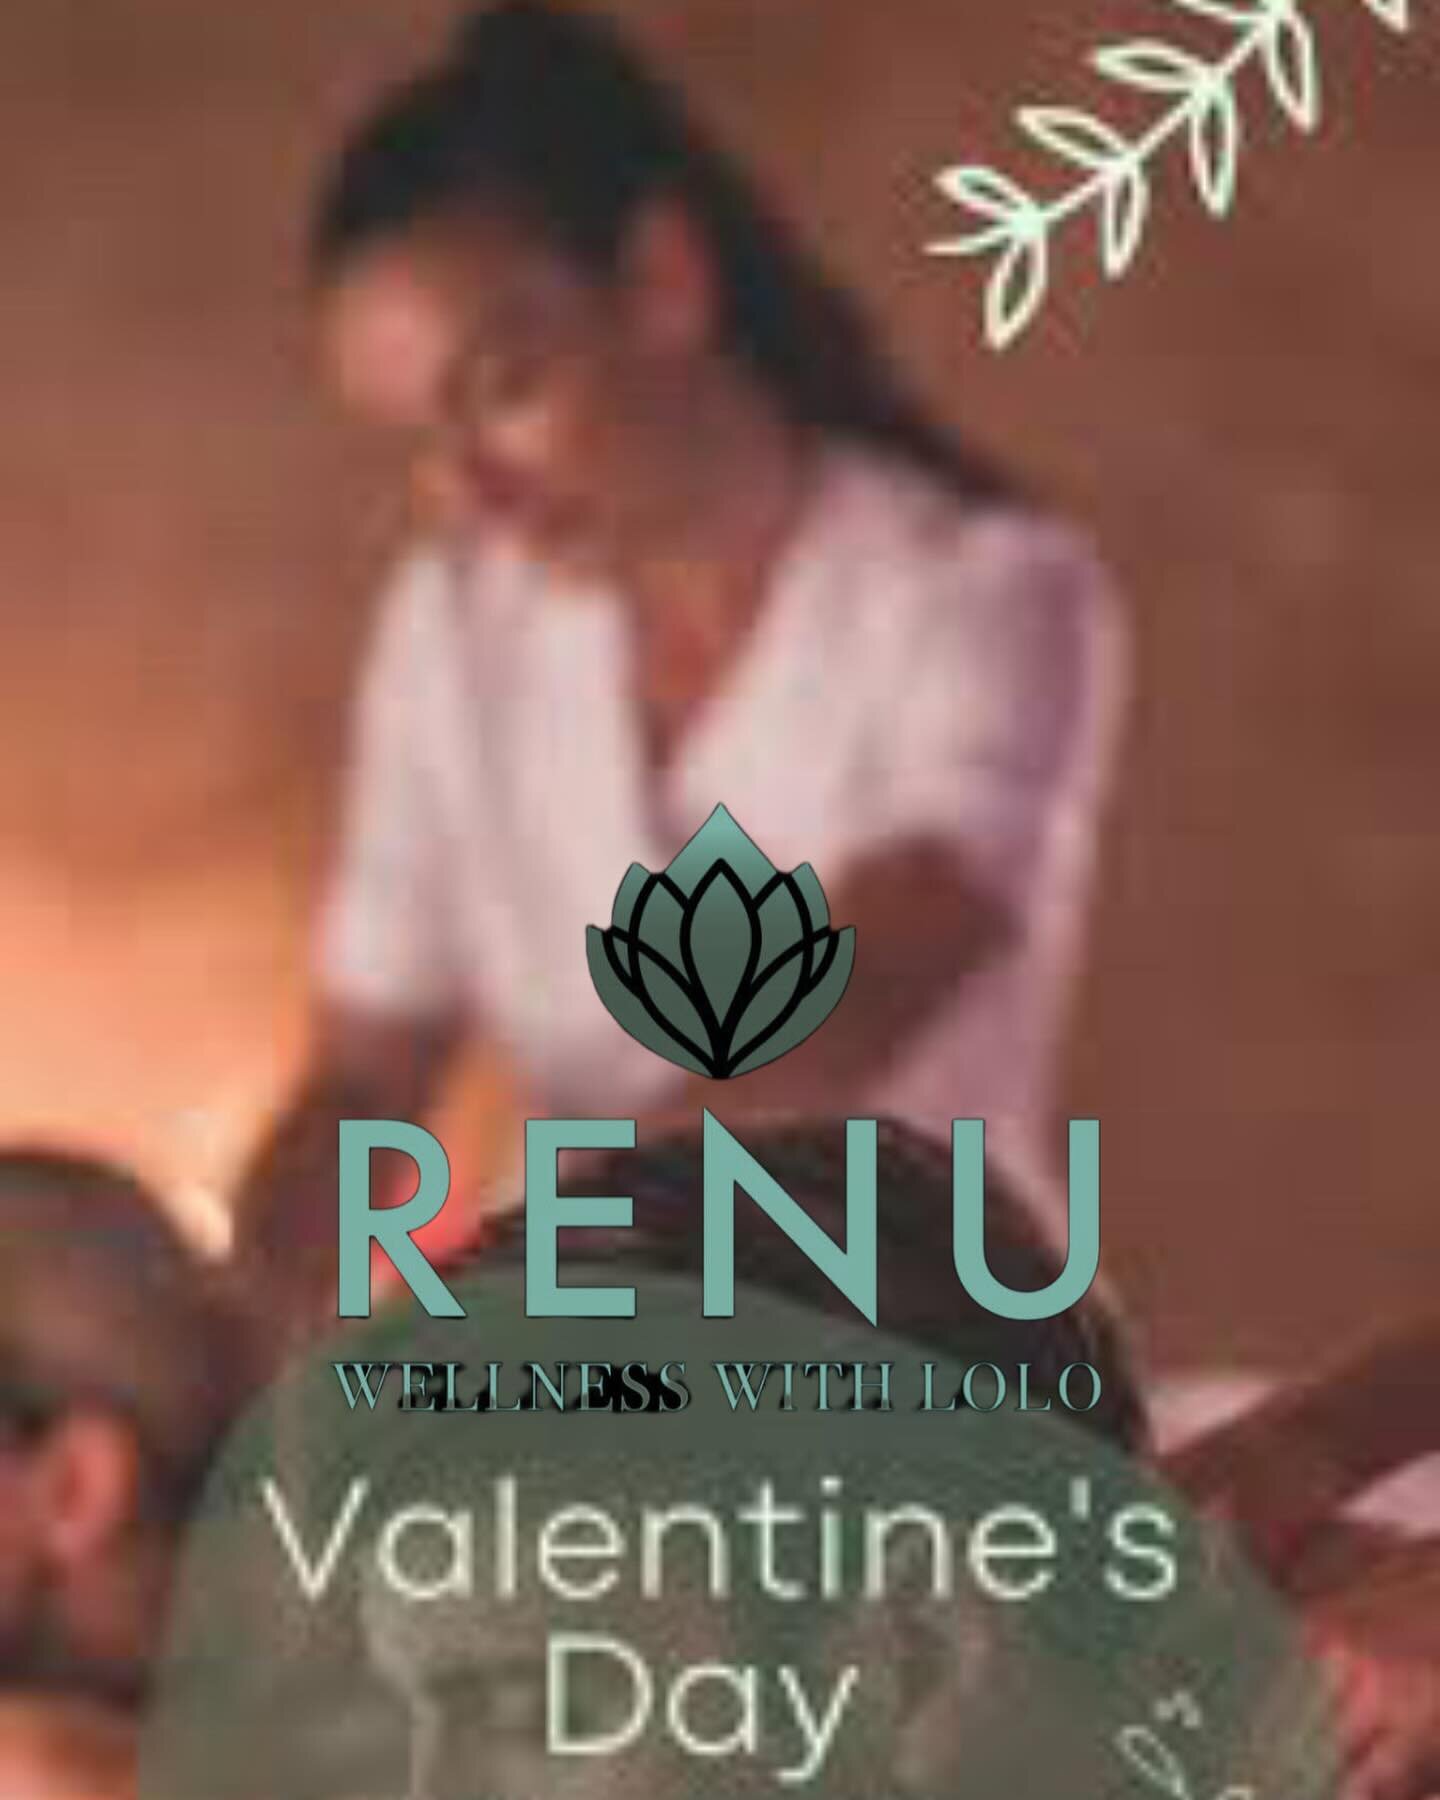 💕 Treat Yourself or Your Loved One This Valentine's Day! 💕

Valentine's Day is just around the corner, and what better way to celebrate than with a relaxing and rejuvenating massage in my cozy treatment room? Whether you're looking to pamper yourse